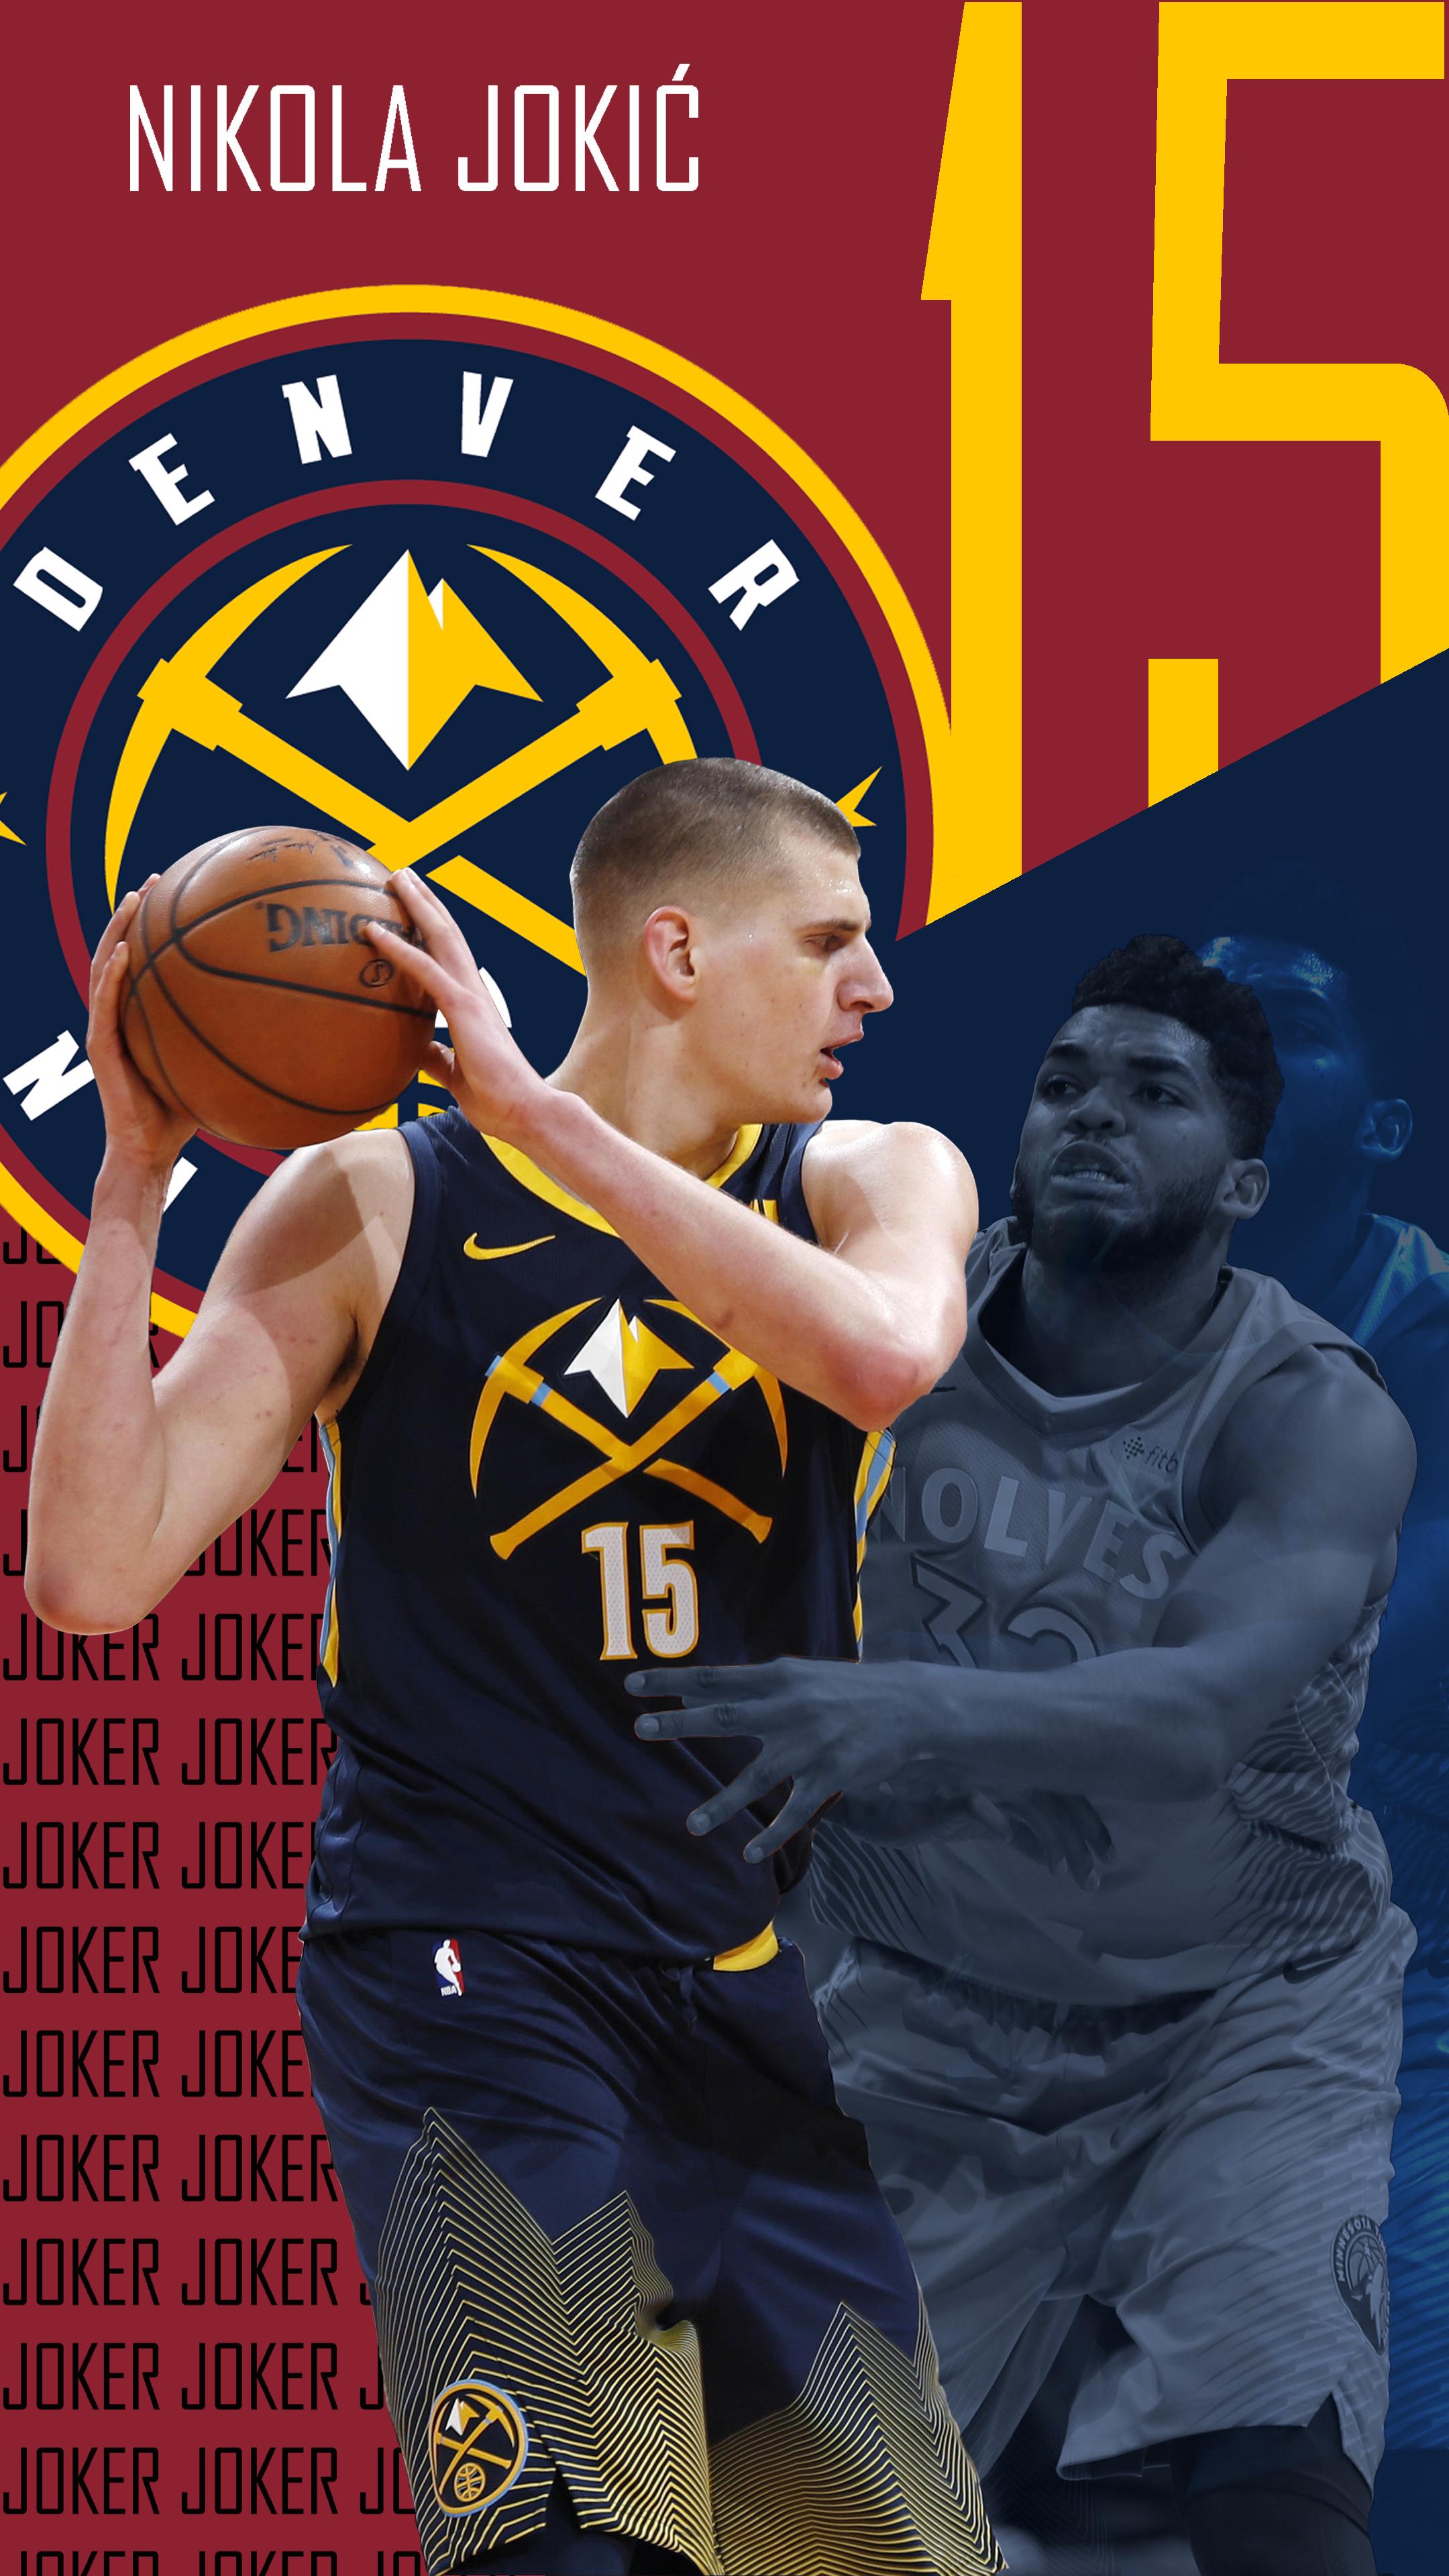 All Wallpaper I Ever Made In One Place Denvernuggets